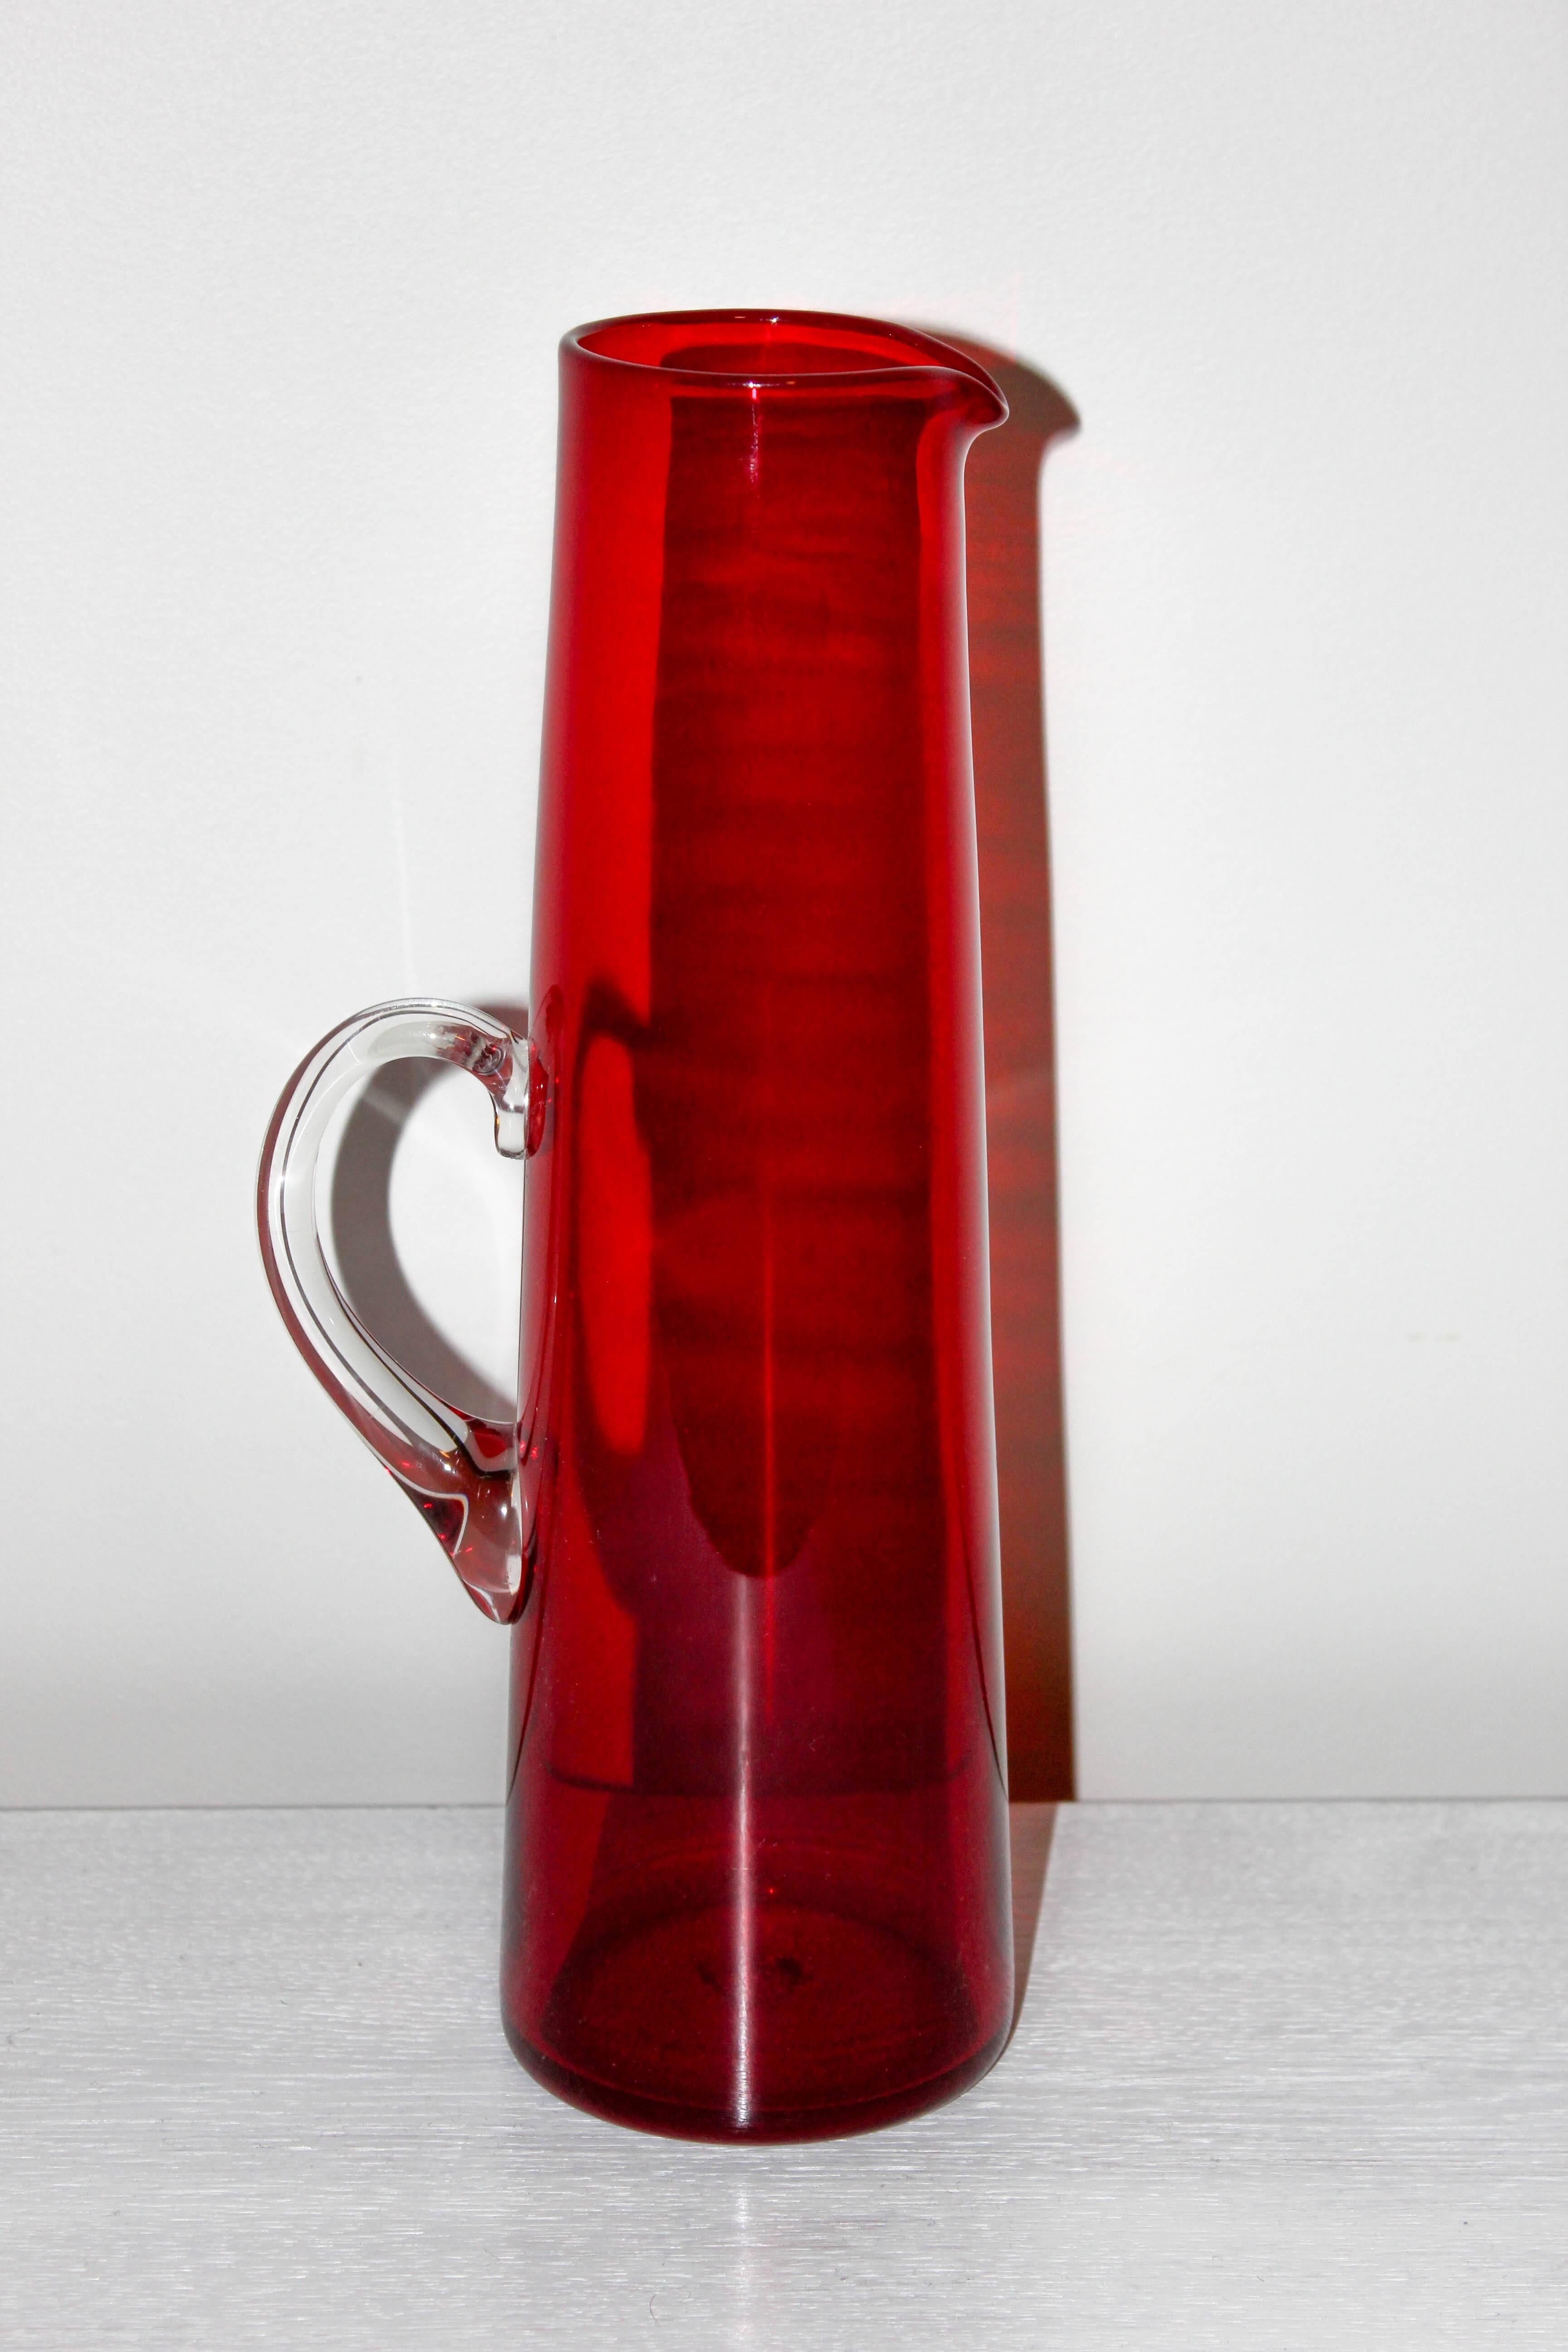 Midcentury Glass Jug designed by Monica Bratt and made out of red glass (with transparent handle) at Reijmyre Glasbruk. Excellent vintage condition. 